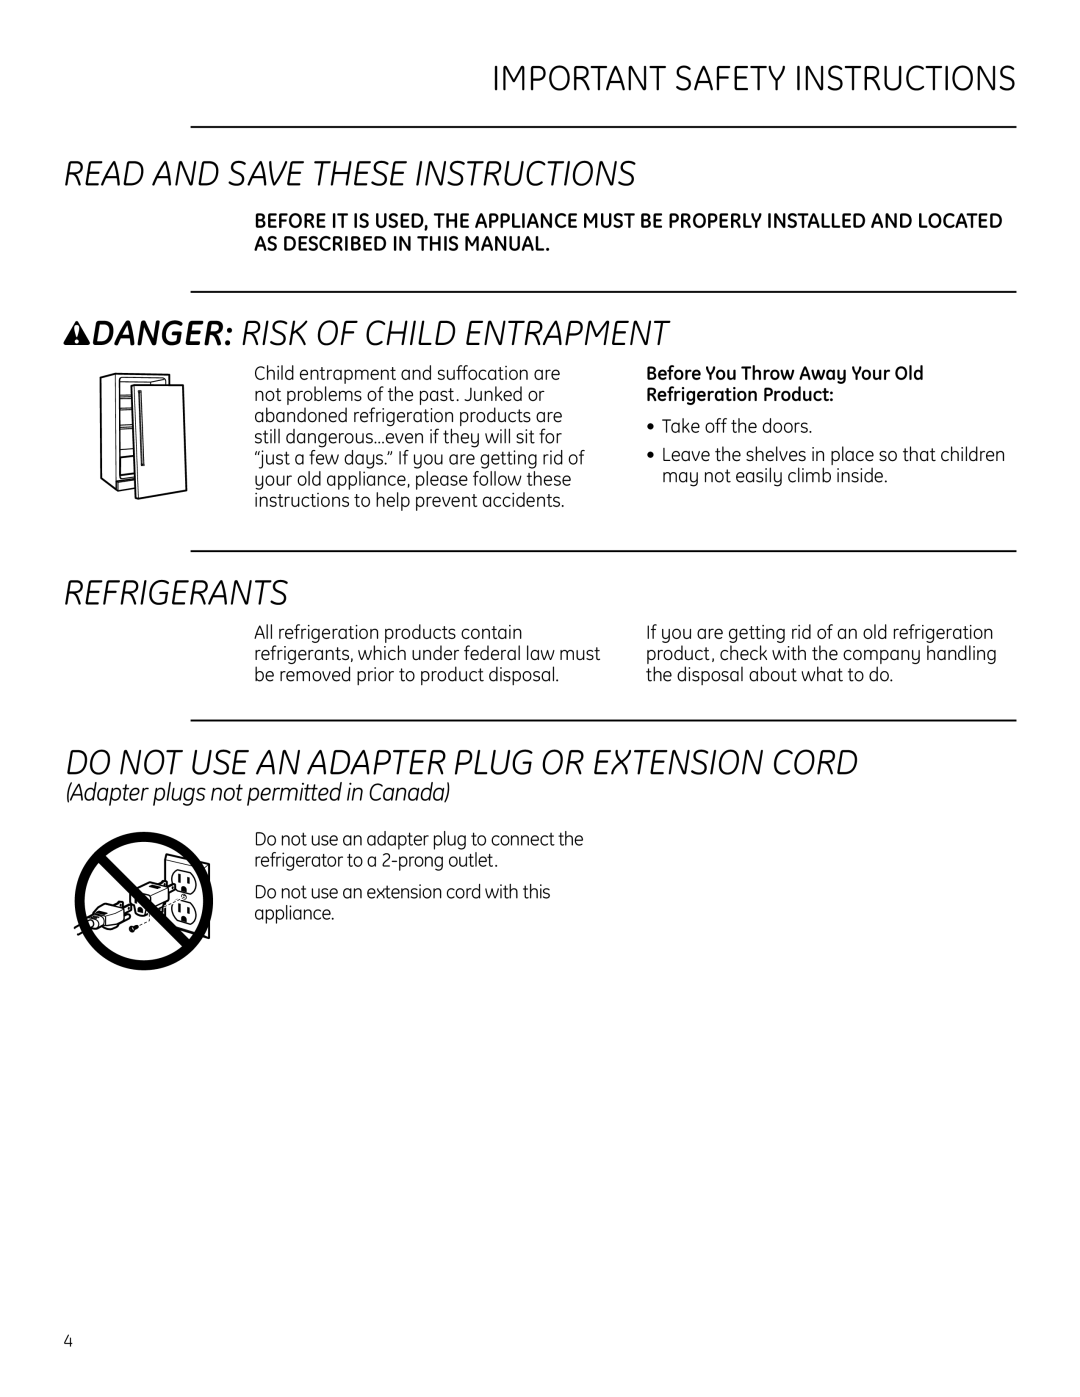 GE Monogram ZDWR240 Important Safety Instructions, Read And Save These Instructions, wDANGER RISK OF CHILD ENTRAPMENT 